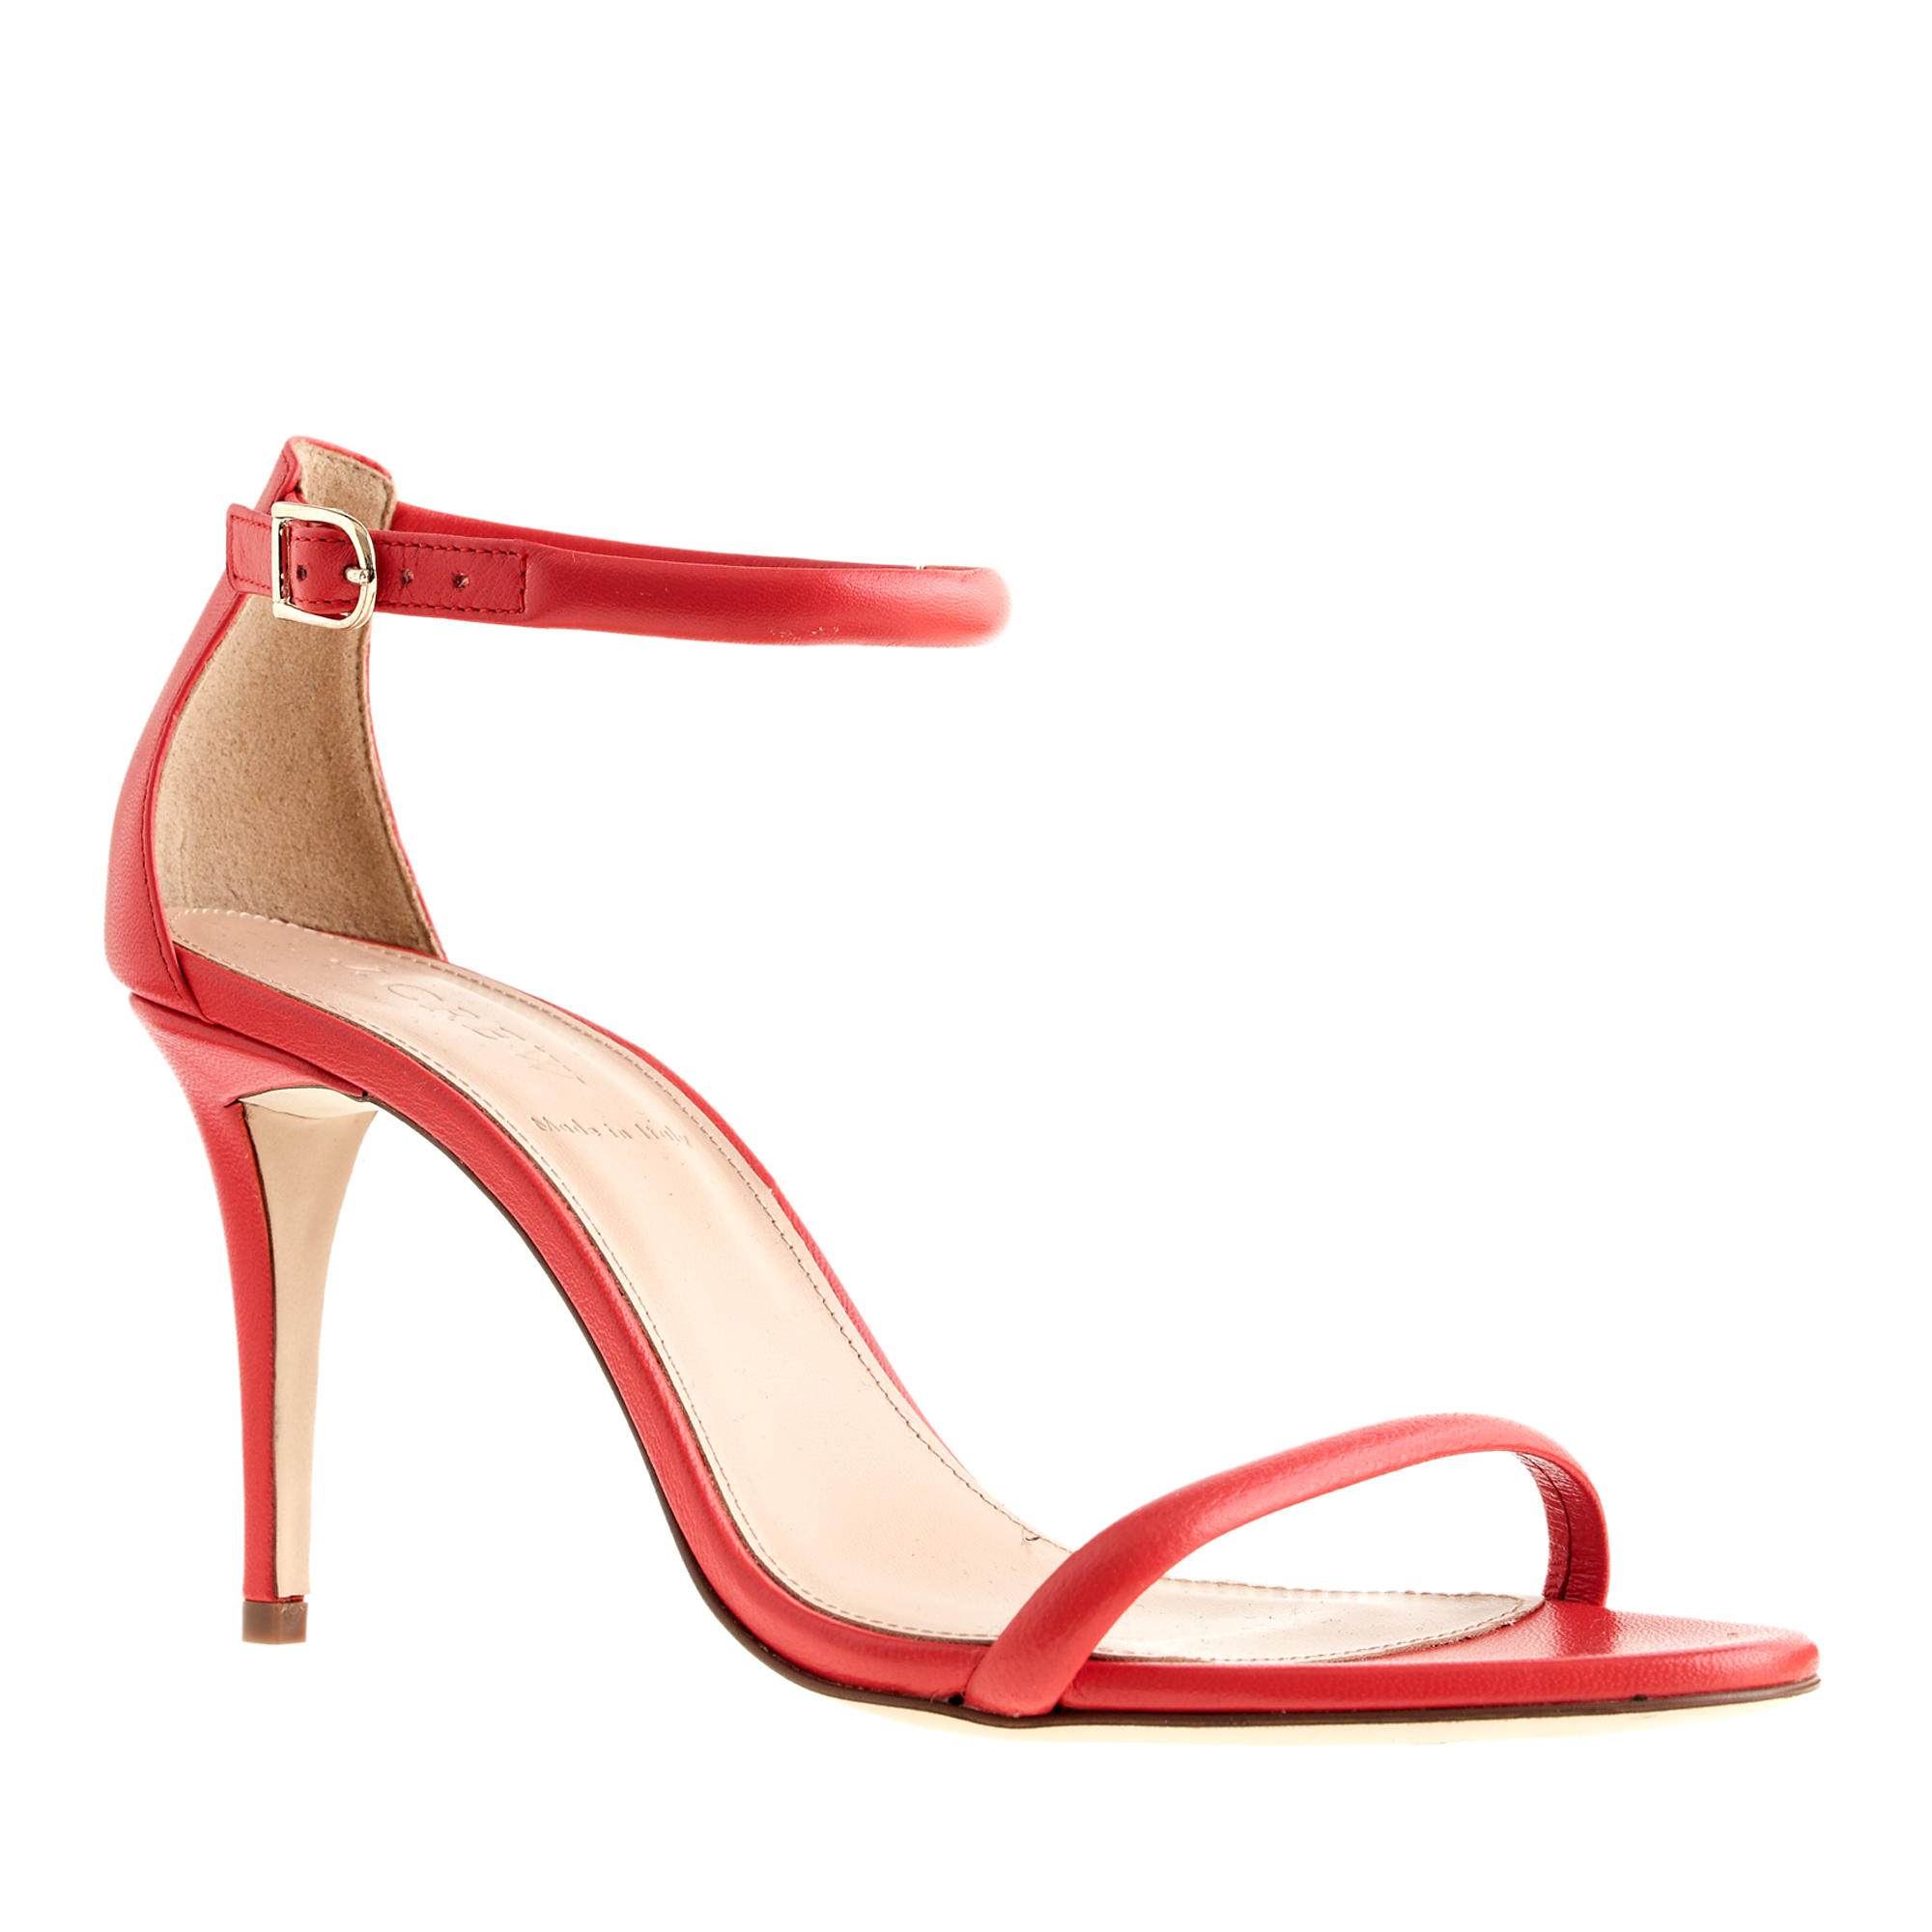 J.crew Strappy High-heel Sandals in Red | Lyst